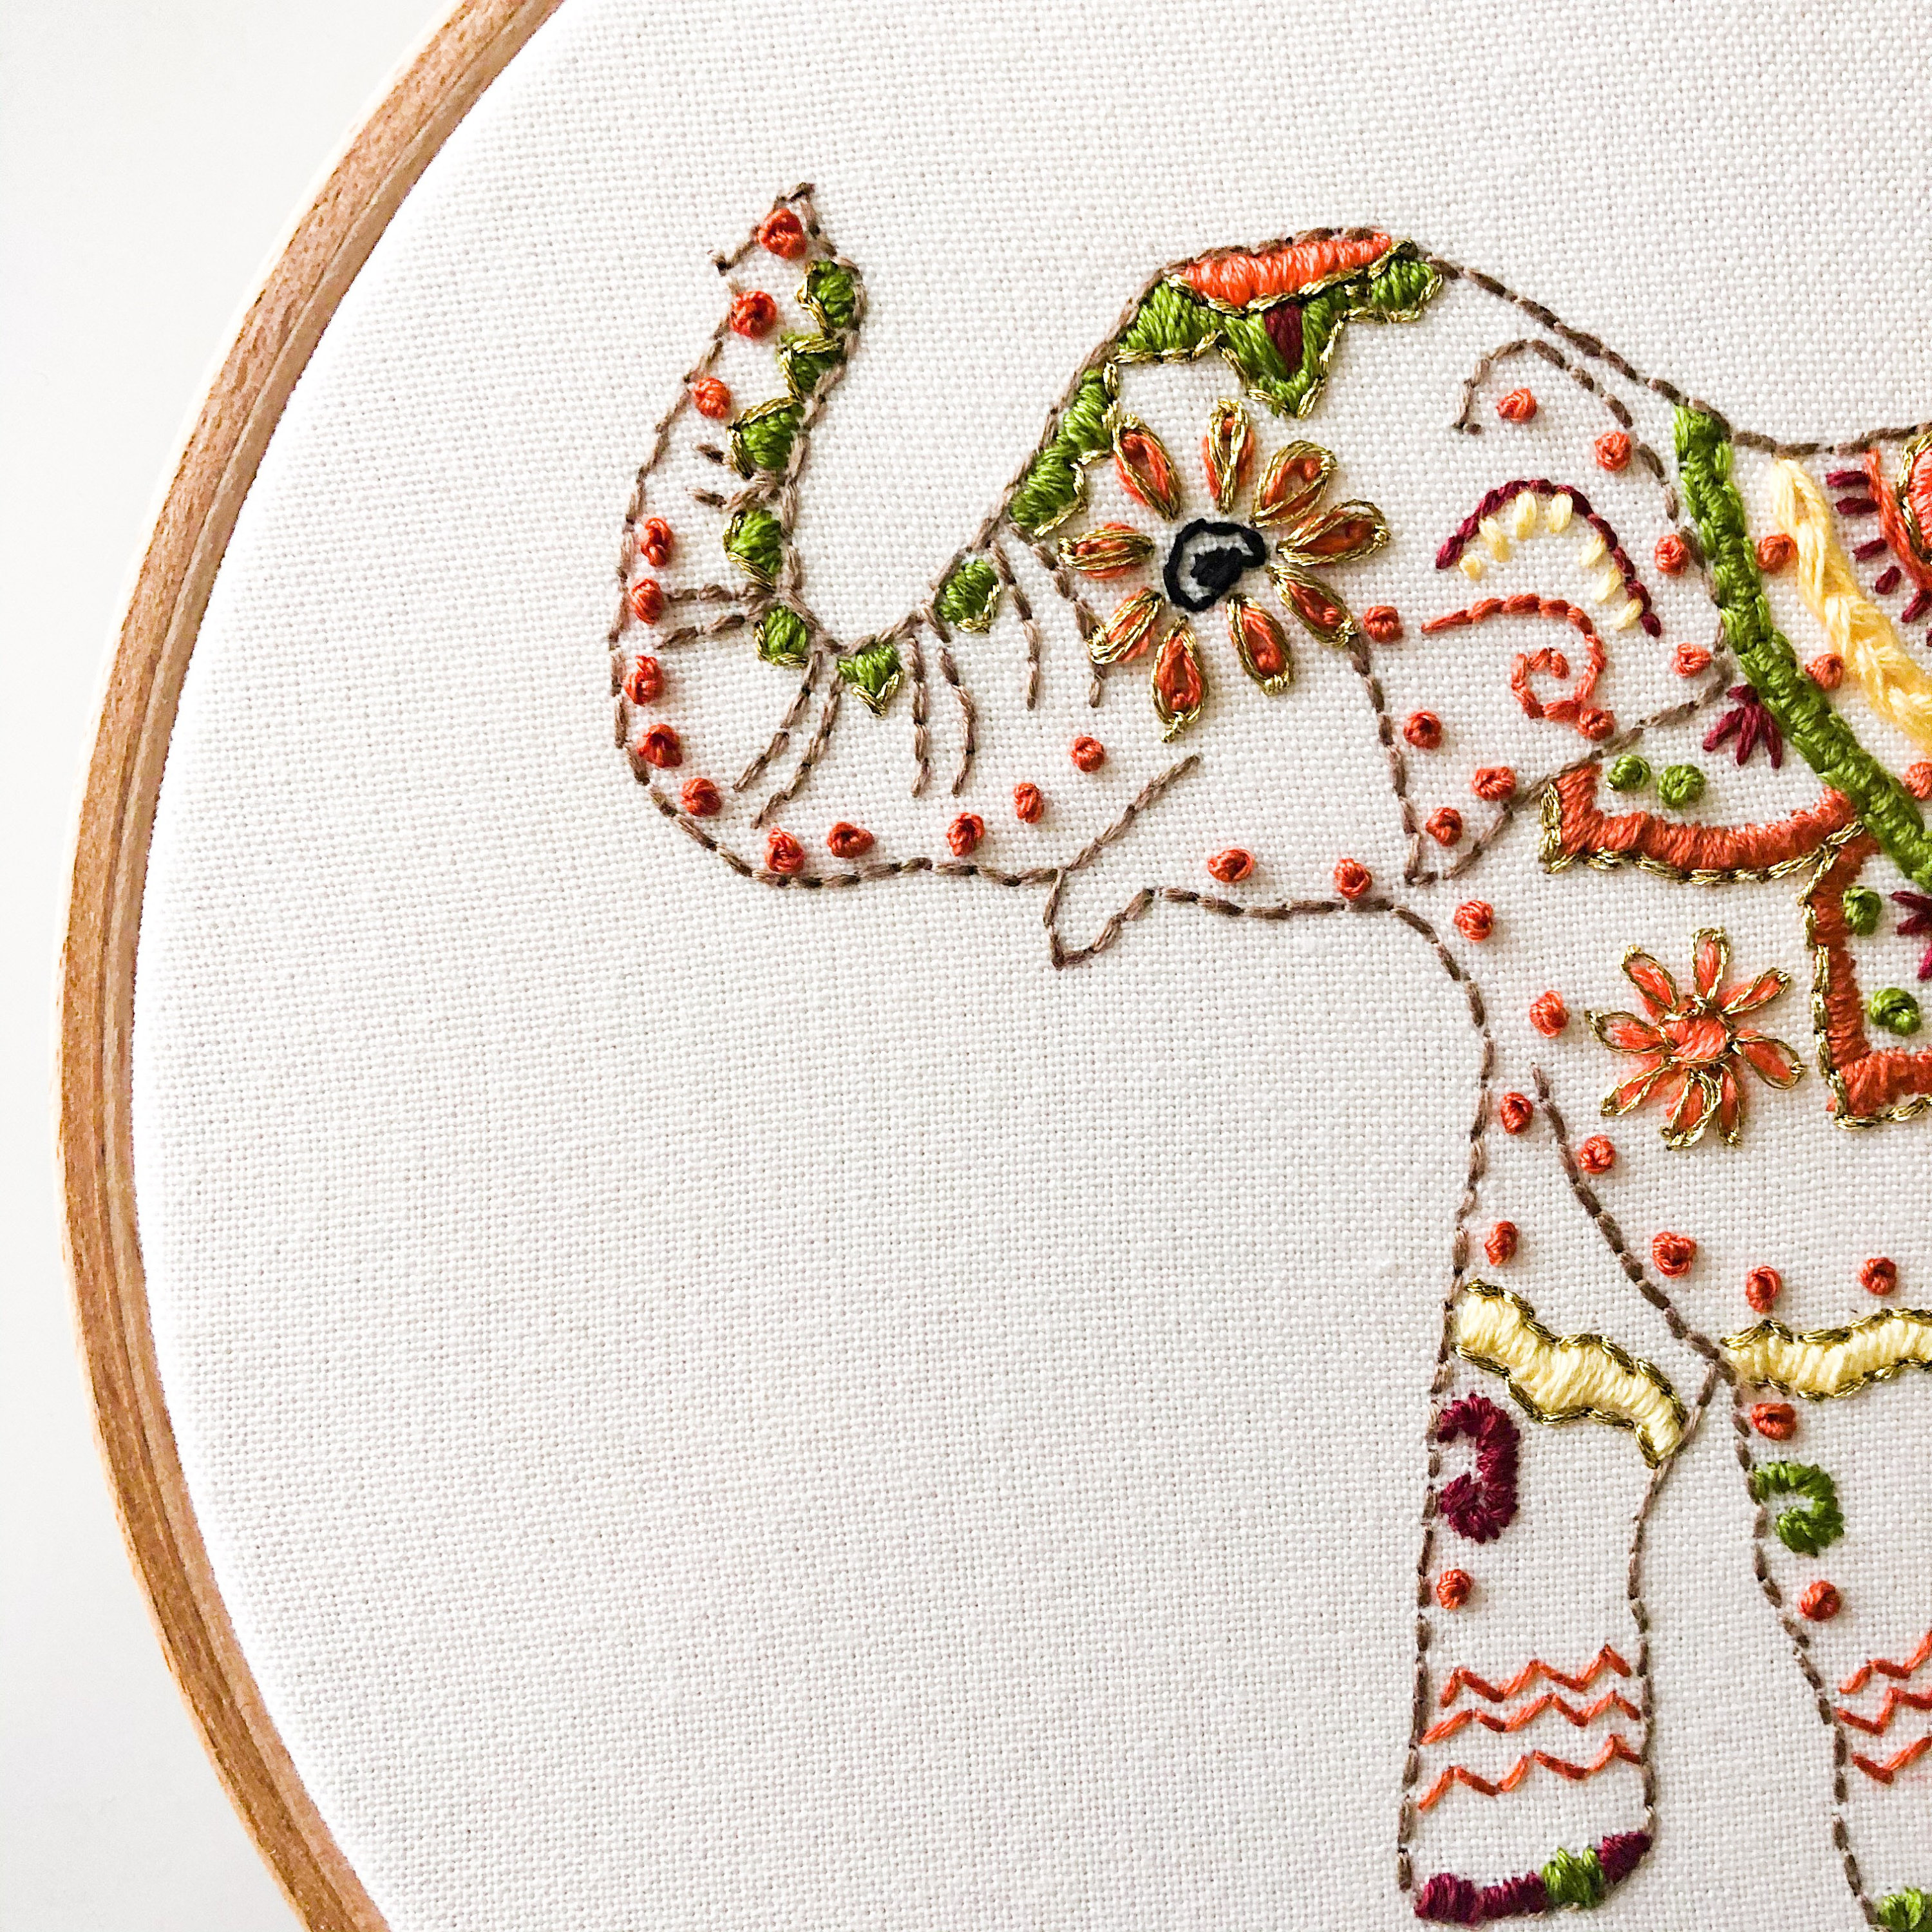 Which brand of embroidery thread should I use? — Embellished Elephant